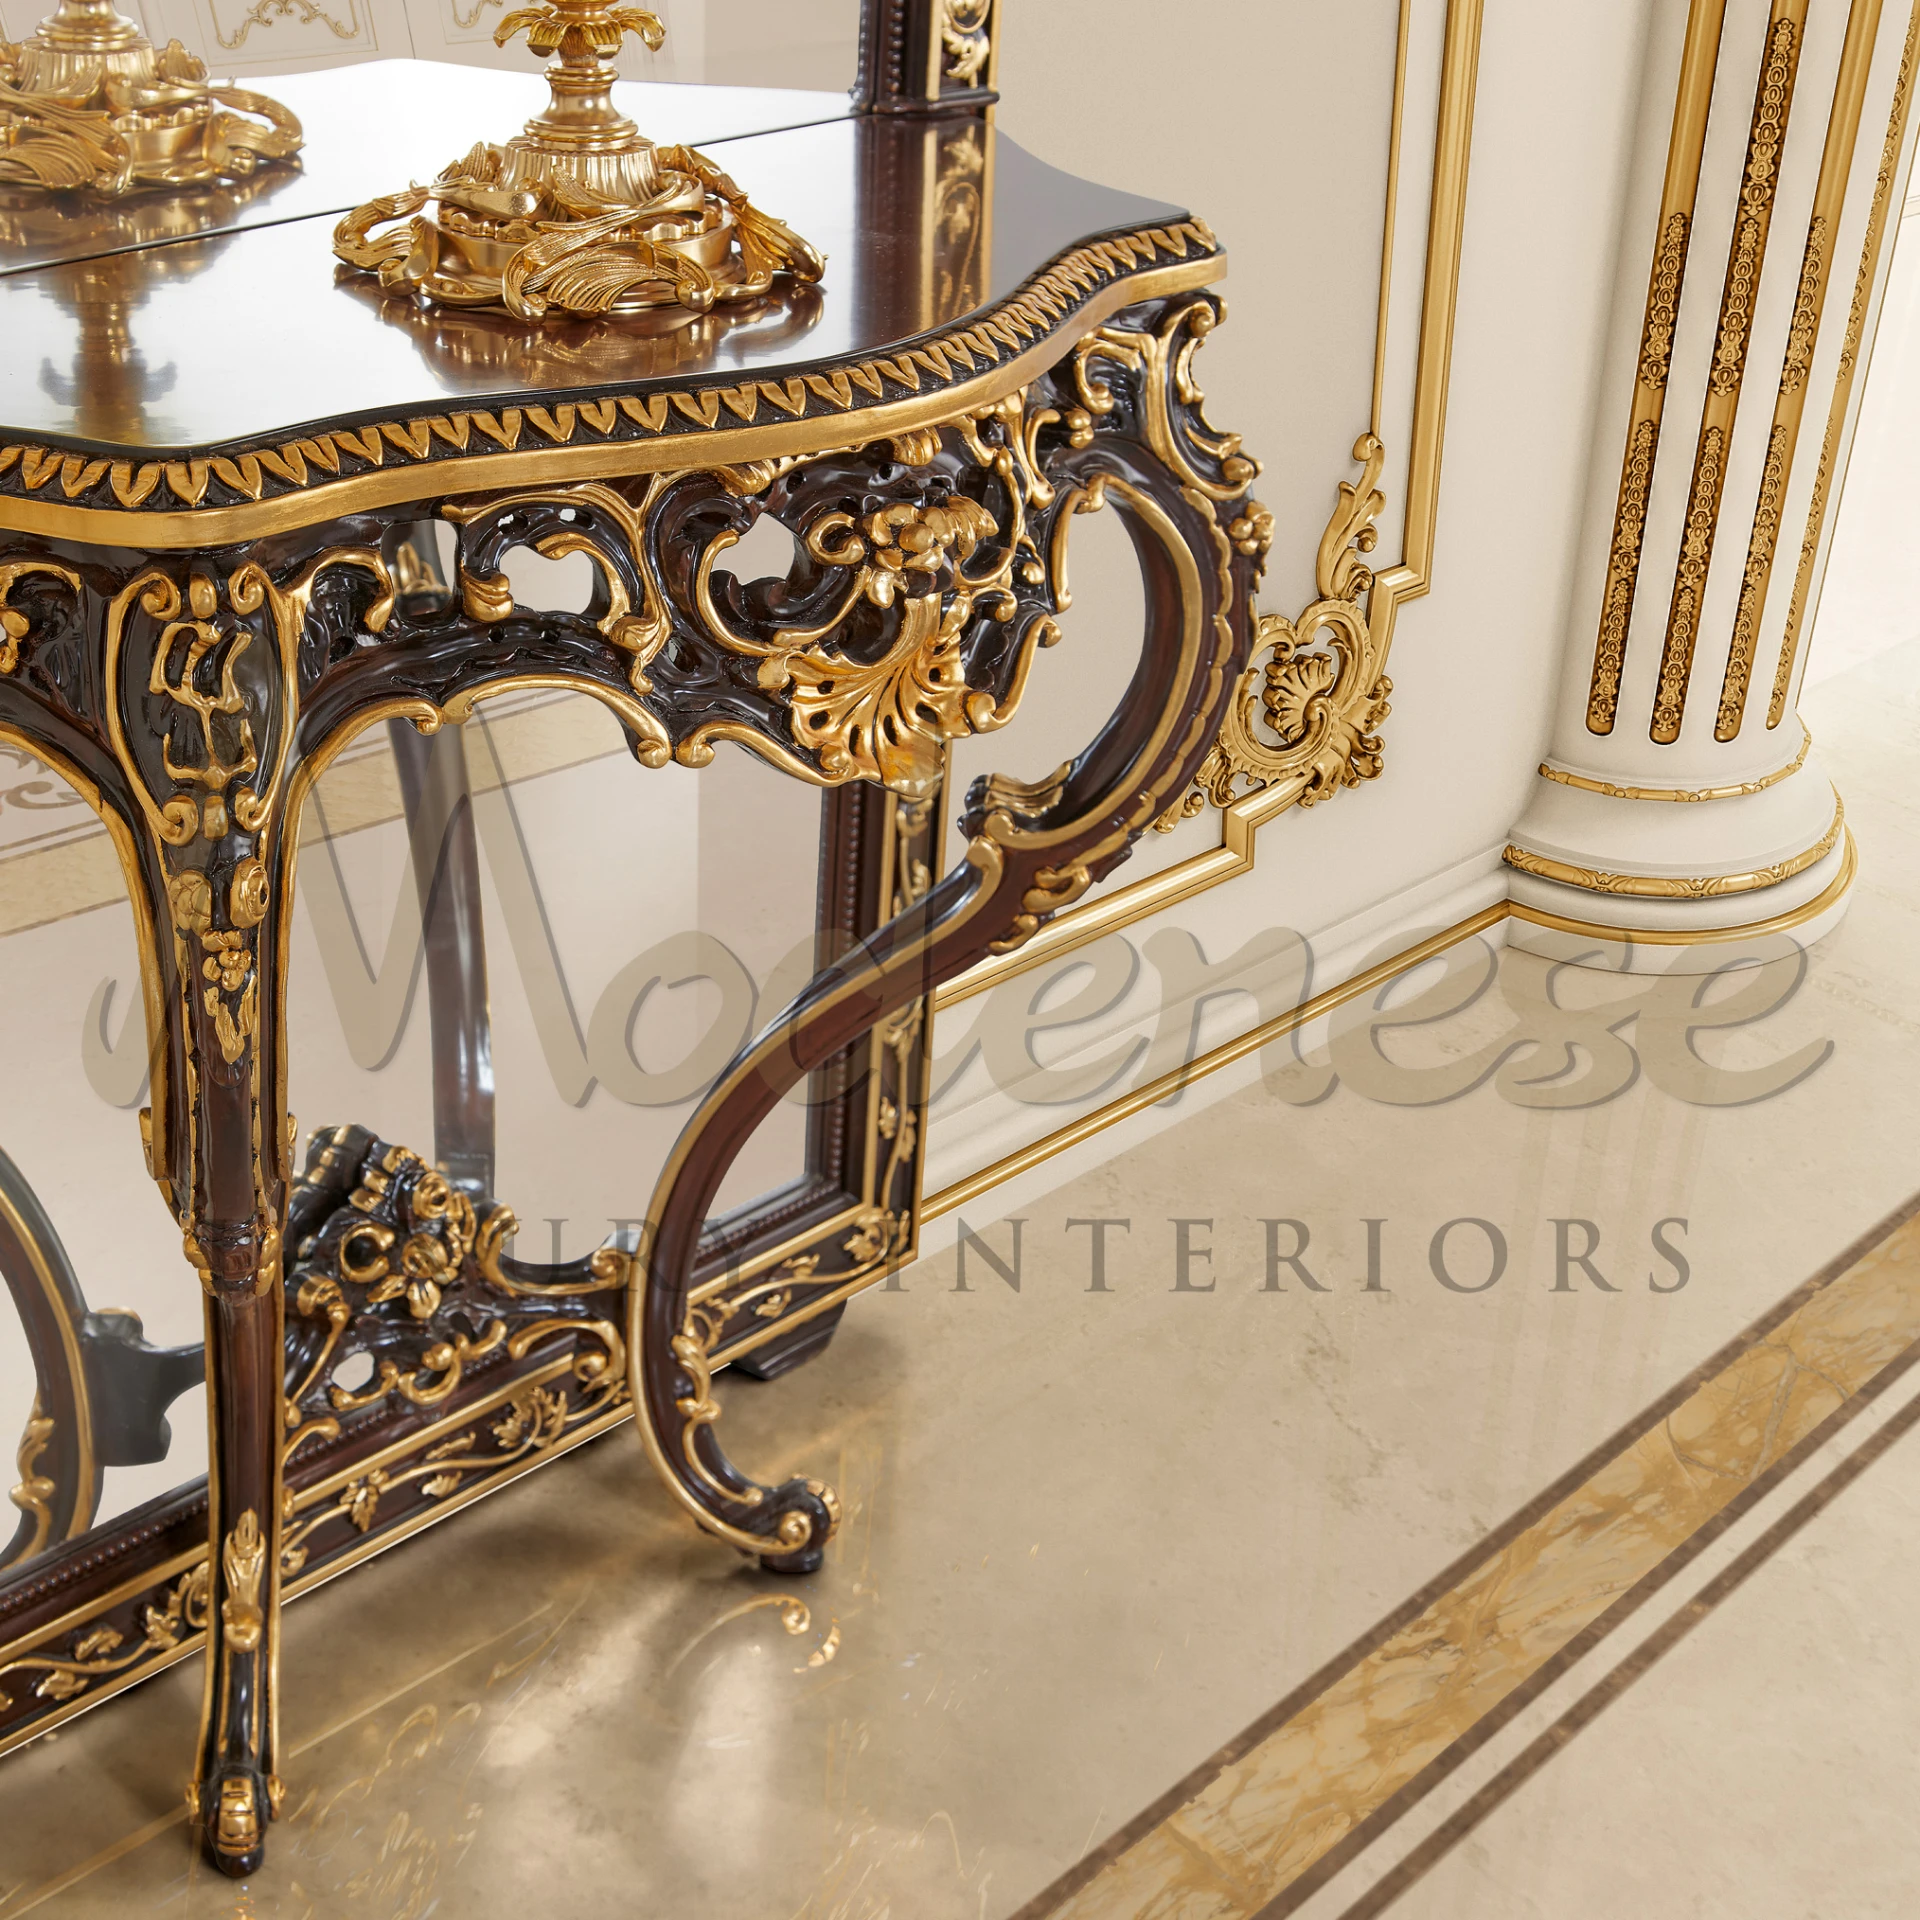 Astonishing Made in Italy Empire Console, fully decorated with gold leaf and walnut finishing for sophisticated interiors.